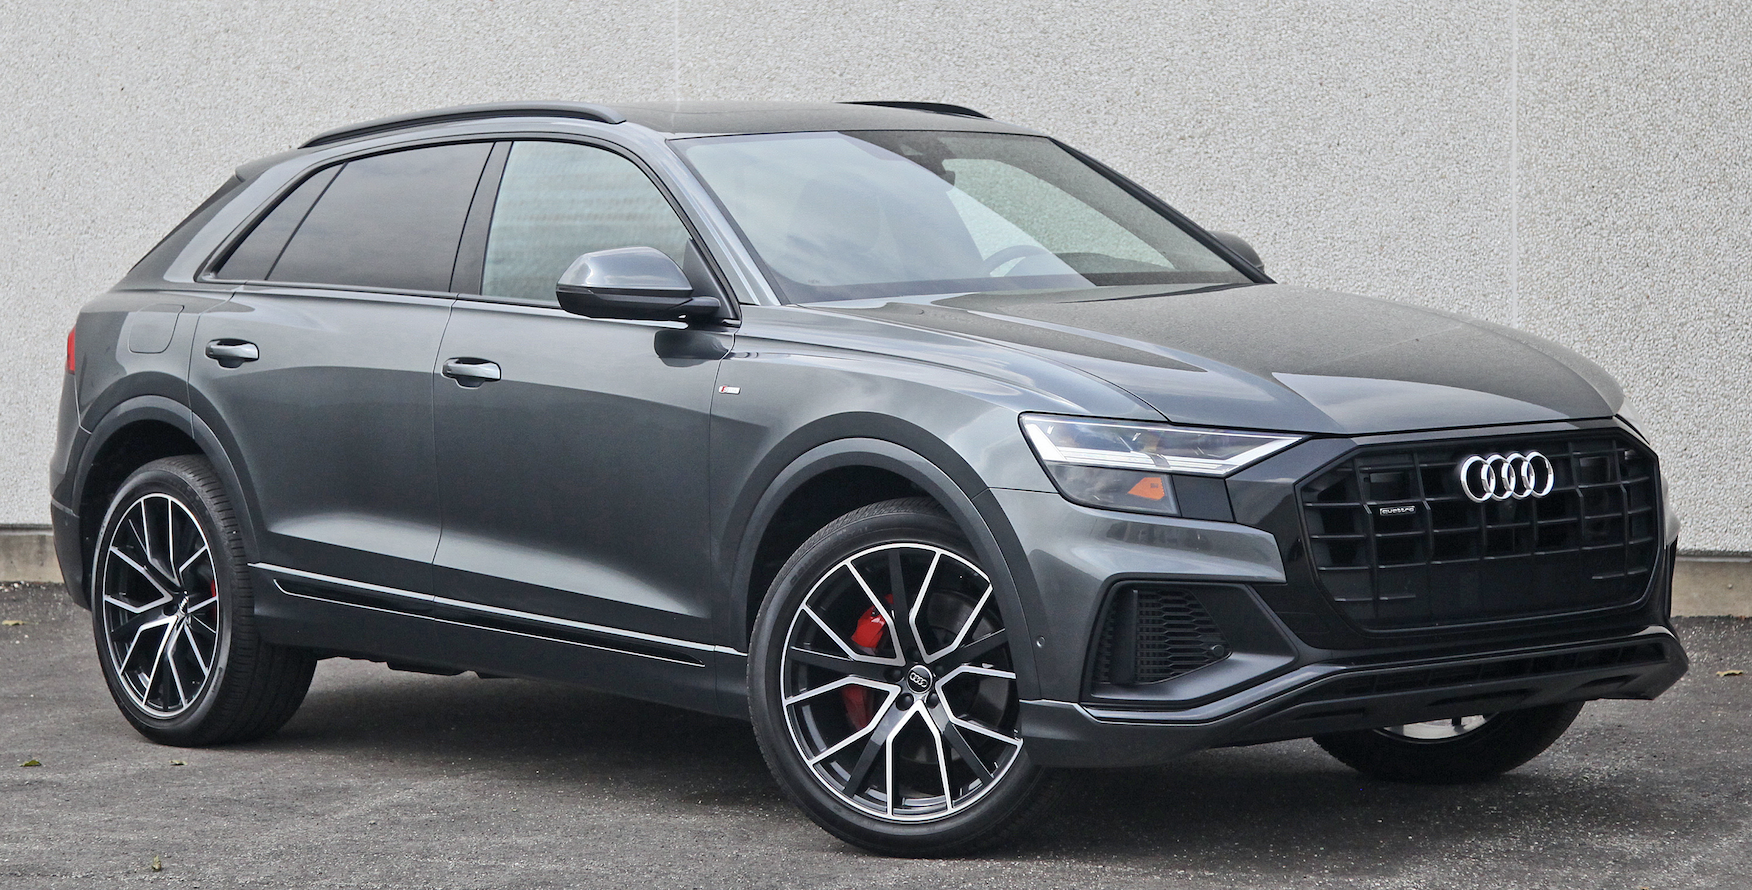 2019 Audi Q8 The Daily Drive | Consumer Guide®